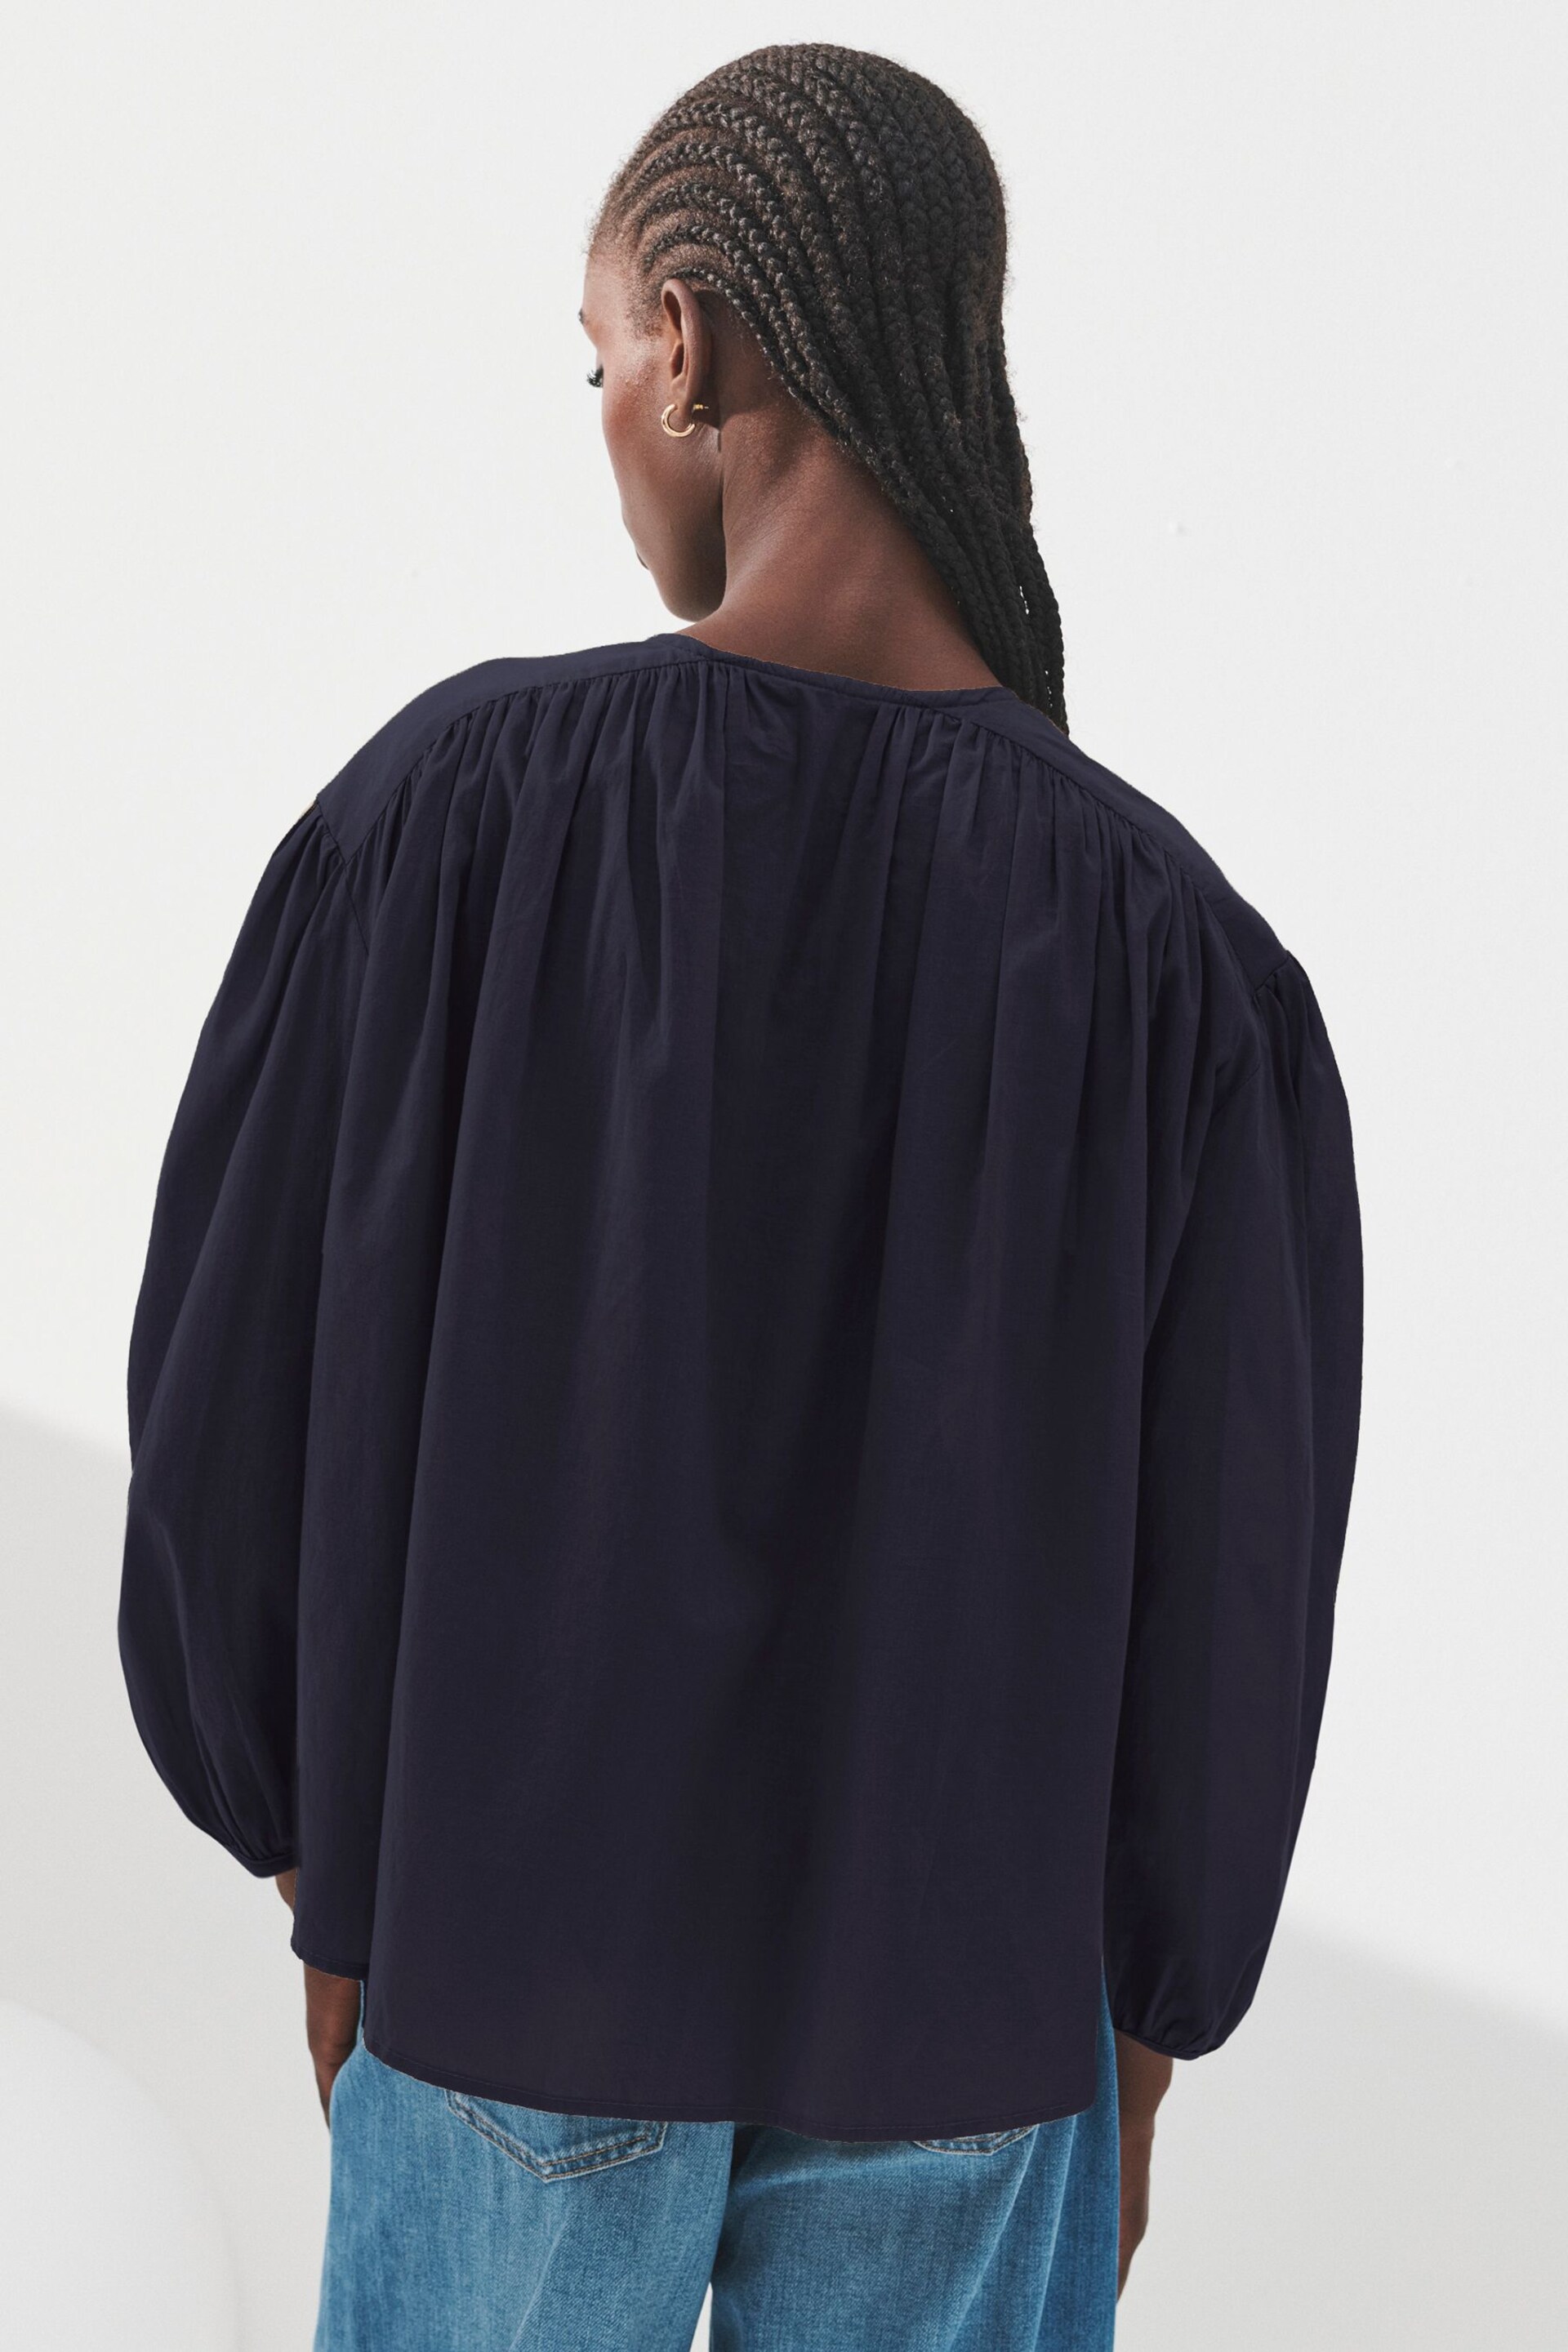 Navy Blue Tie Front Blouse - Image 4 of 6